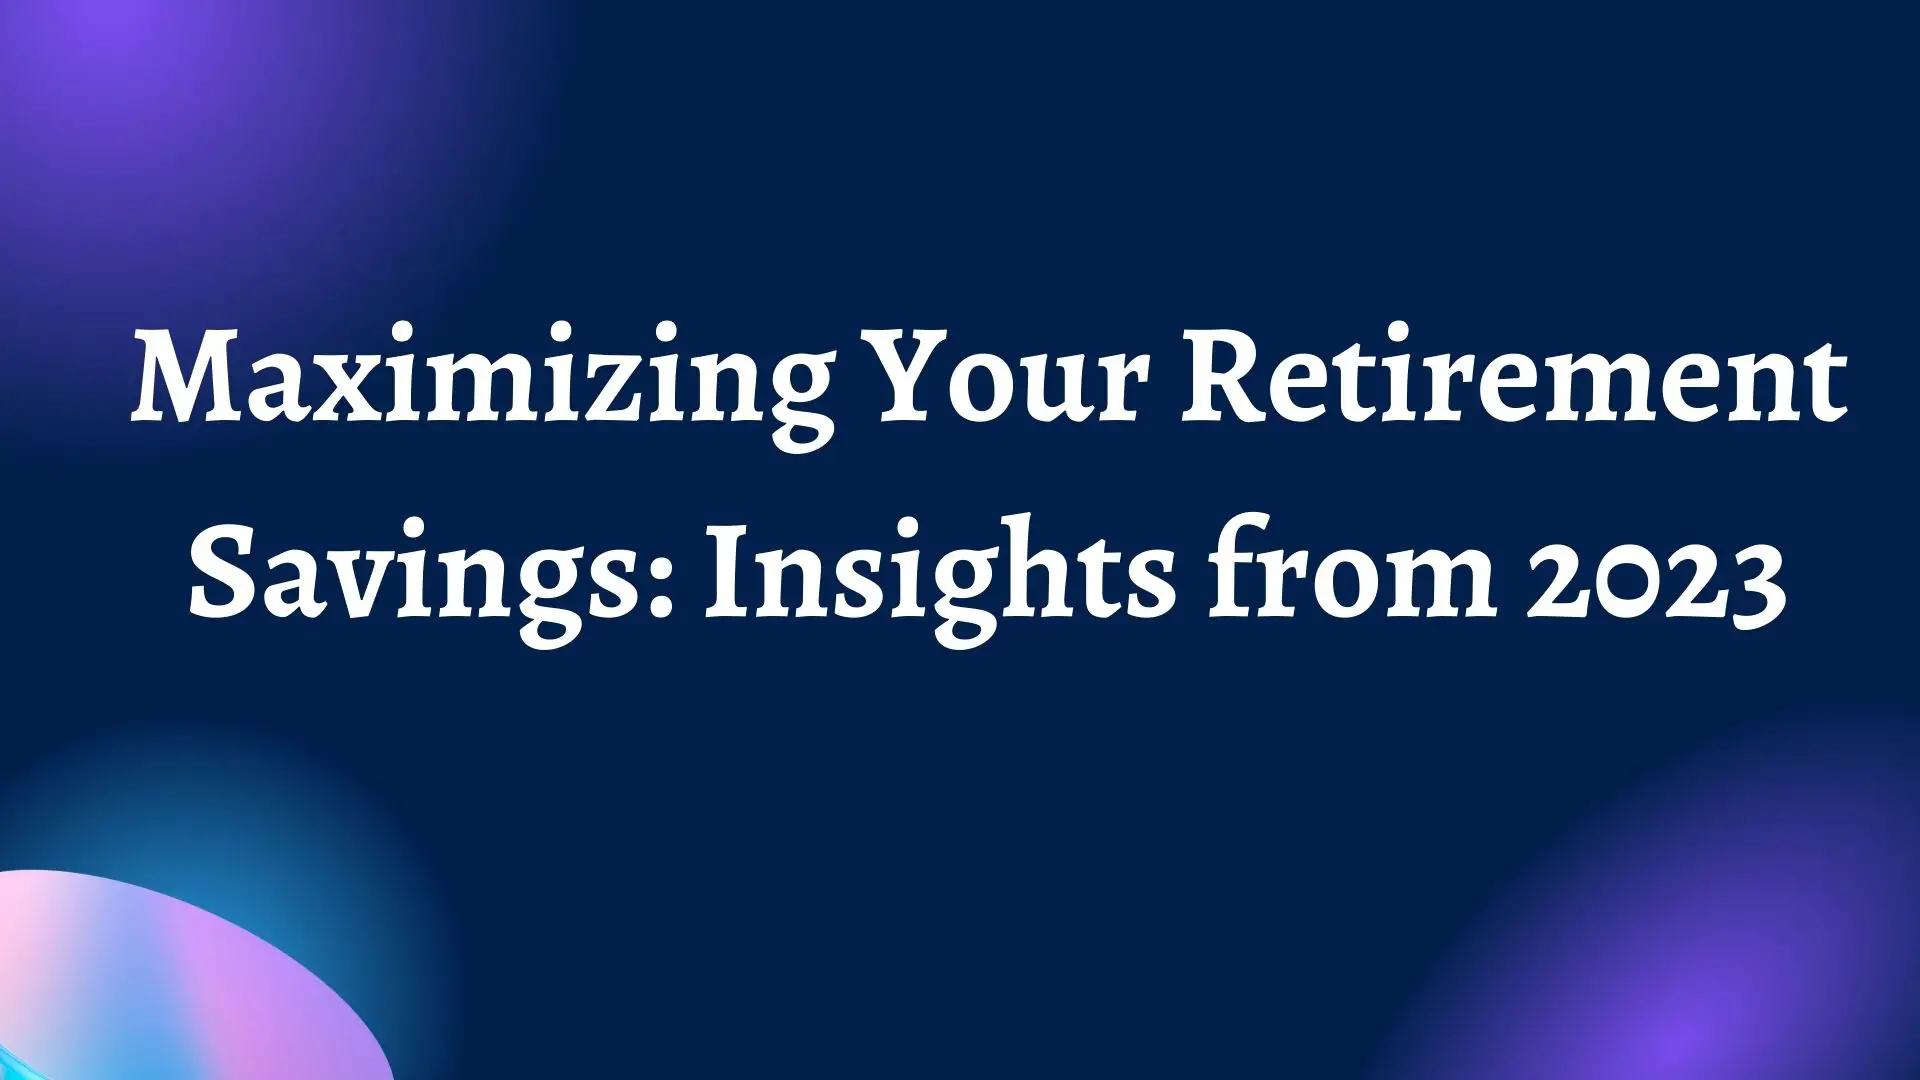 Maximizing Your Retirement Savings: Insights from 2023